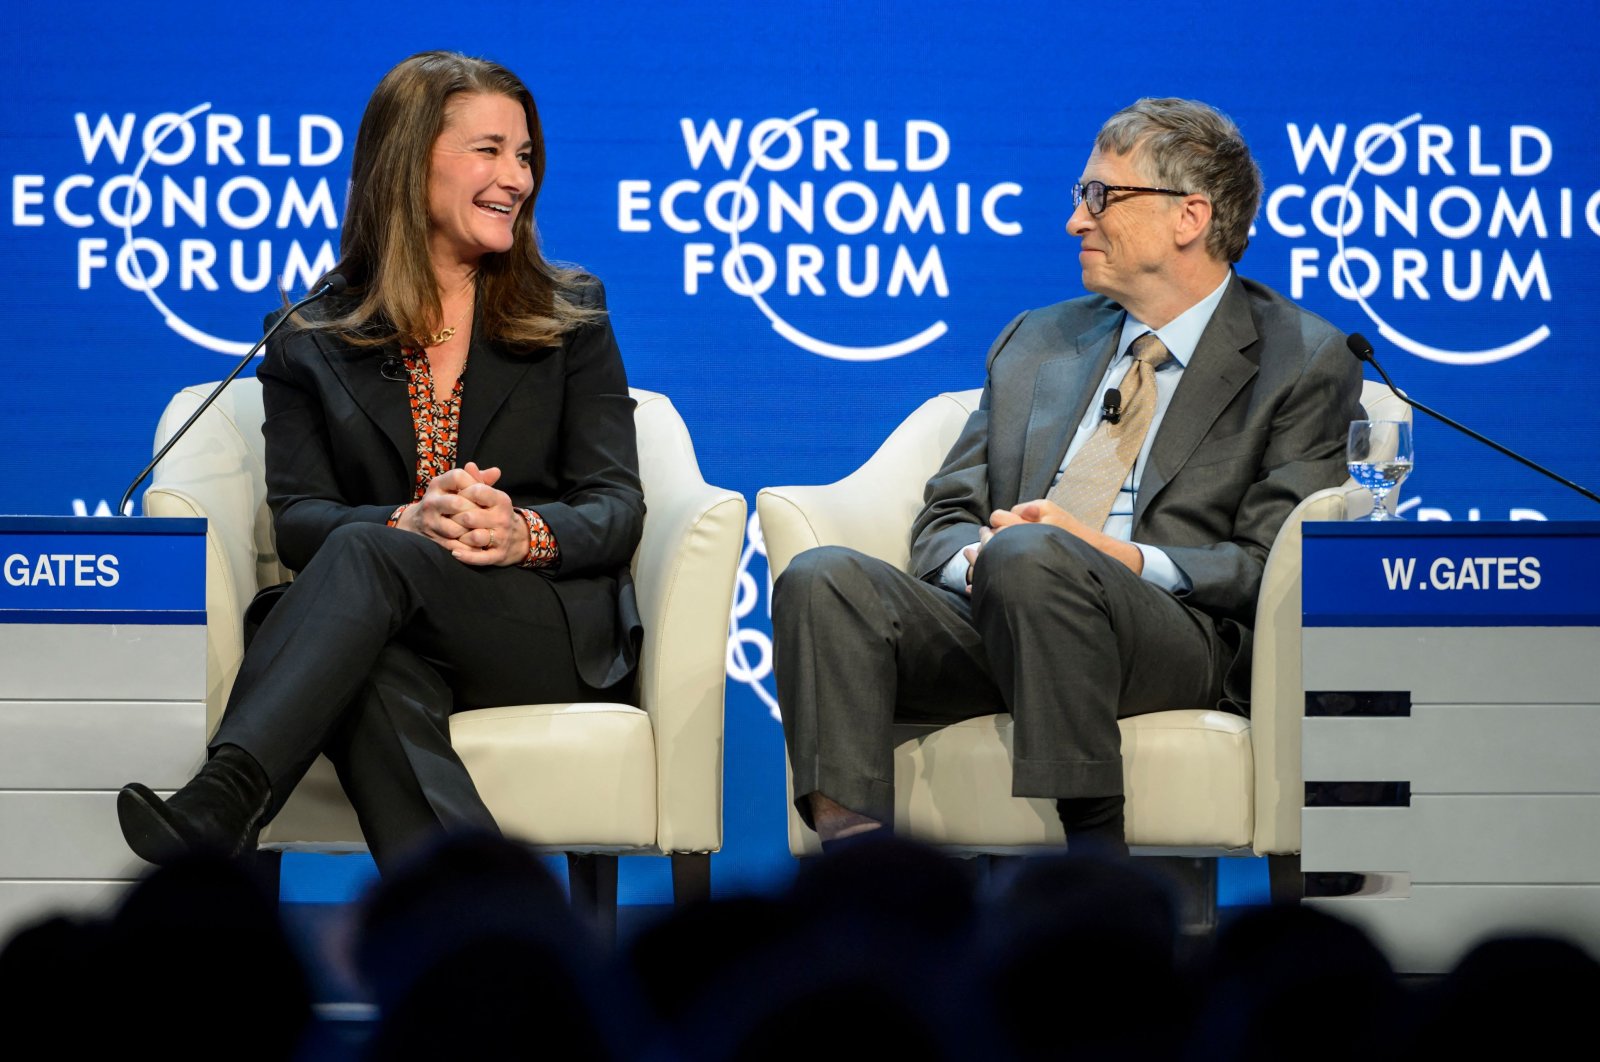 Melinda and Bill Gates attend a session at the Congress Center during the World Economic Forum (WEF) annual meeting in Davos, Switzerland, Jan. 23, 2015. (AFP Photo)